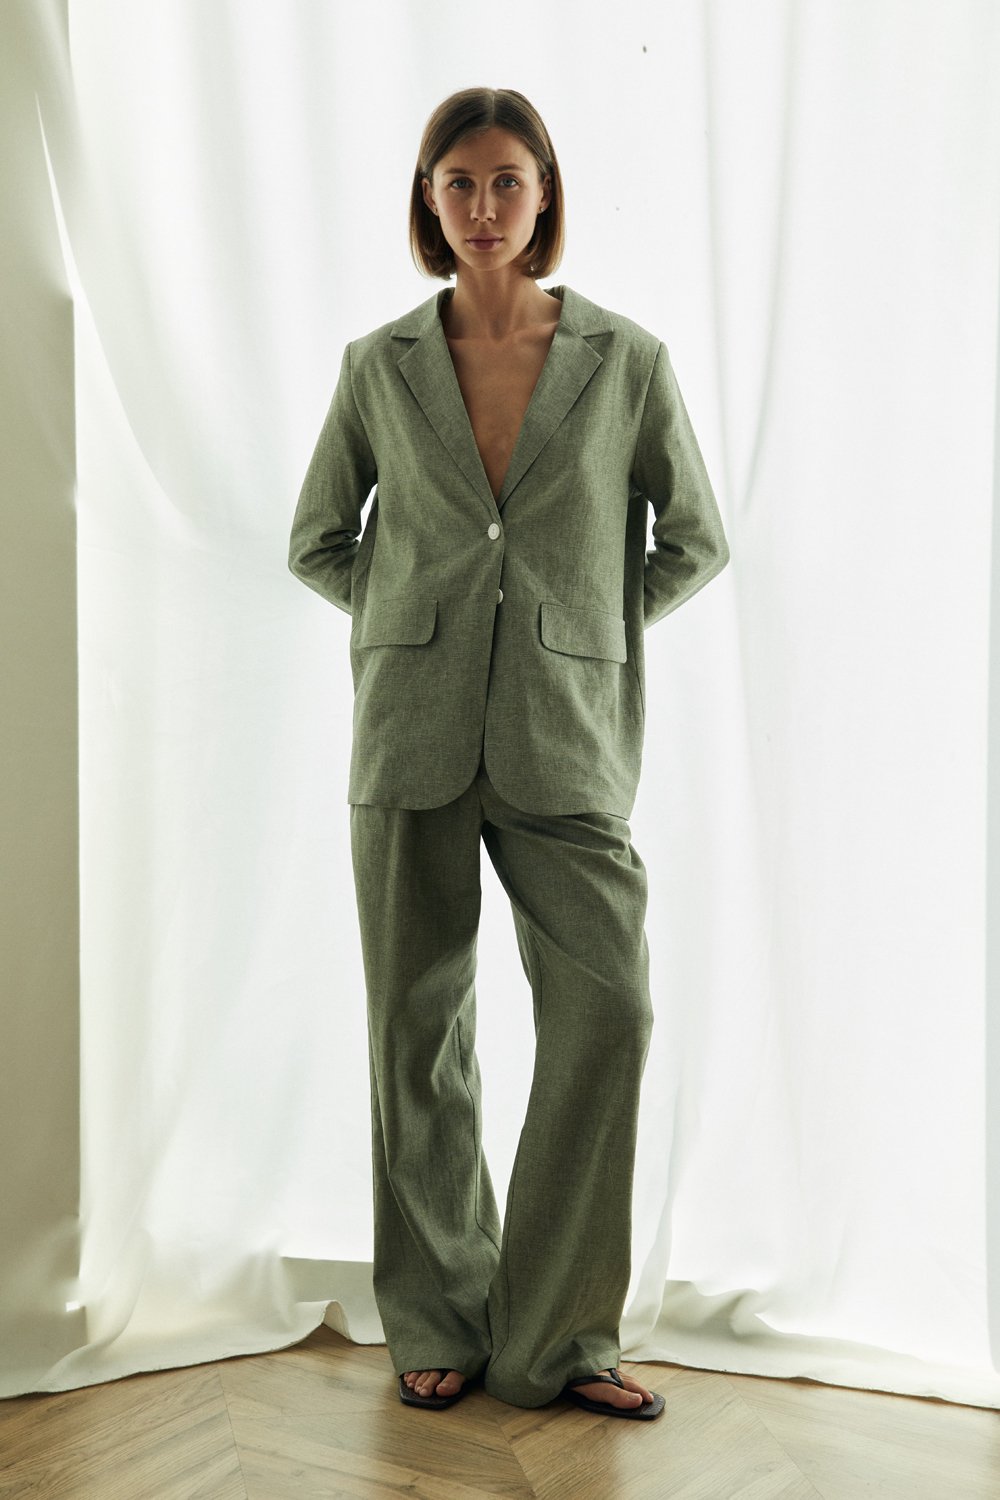 Wide-leg linen trousers in olive color